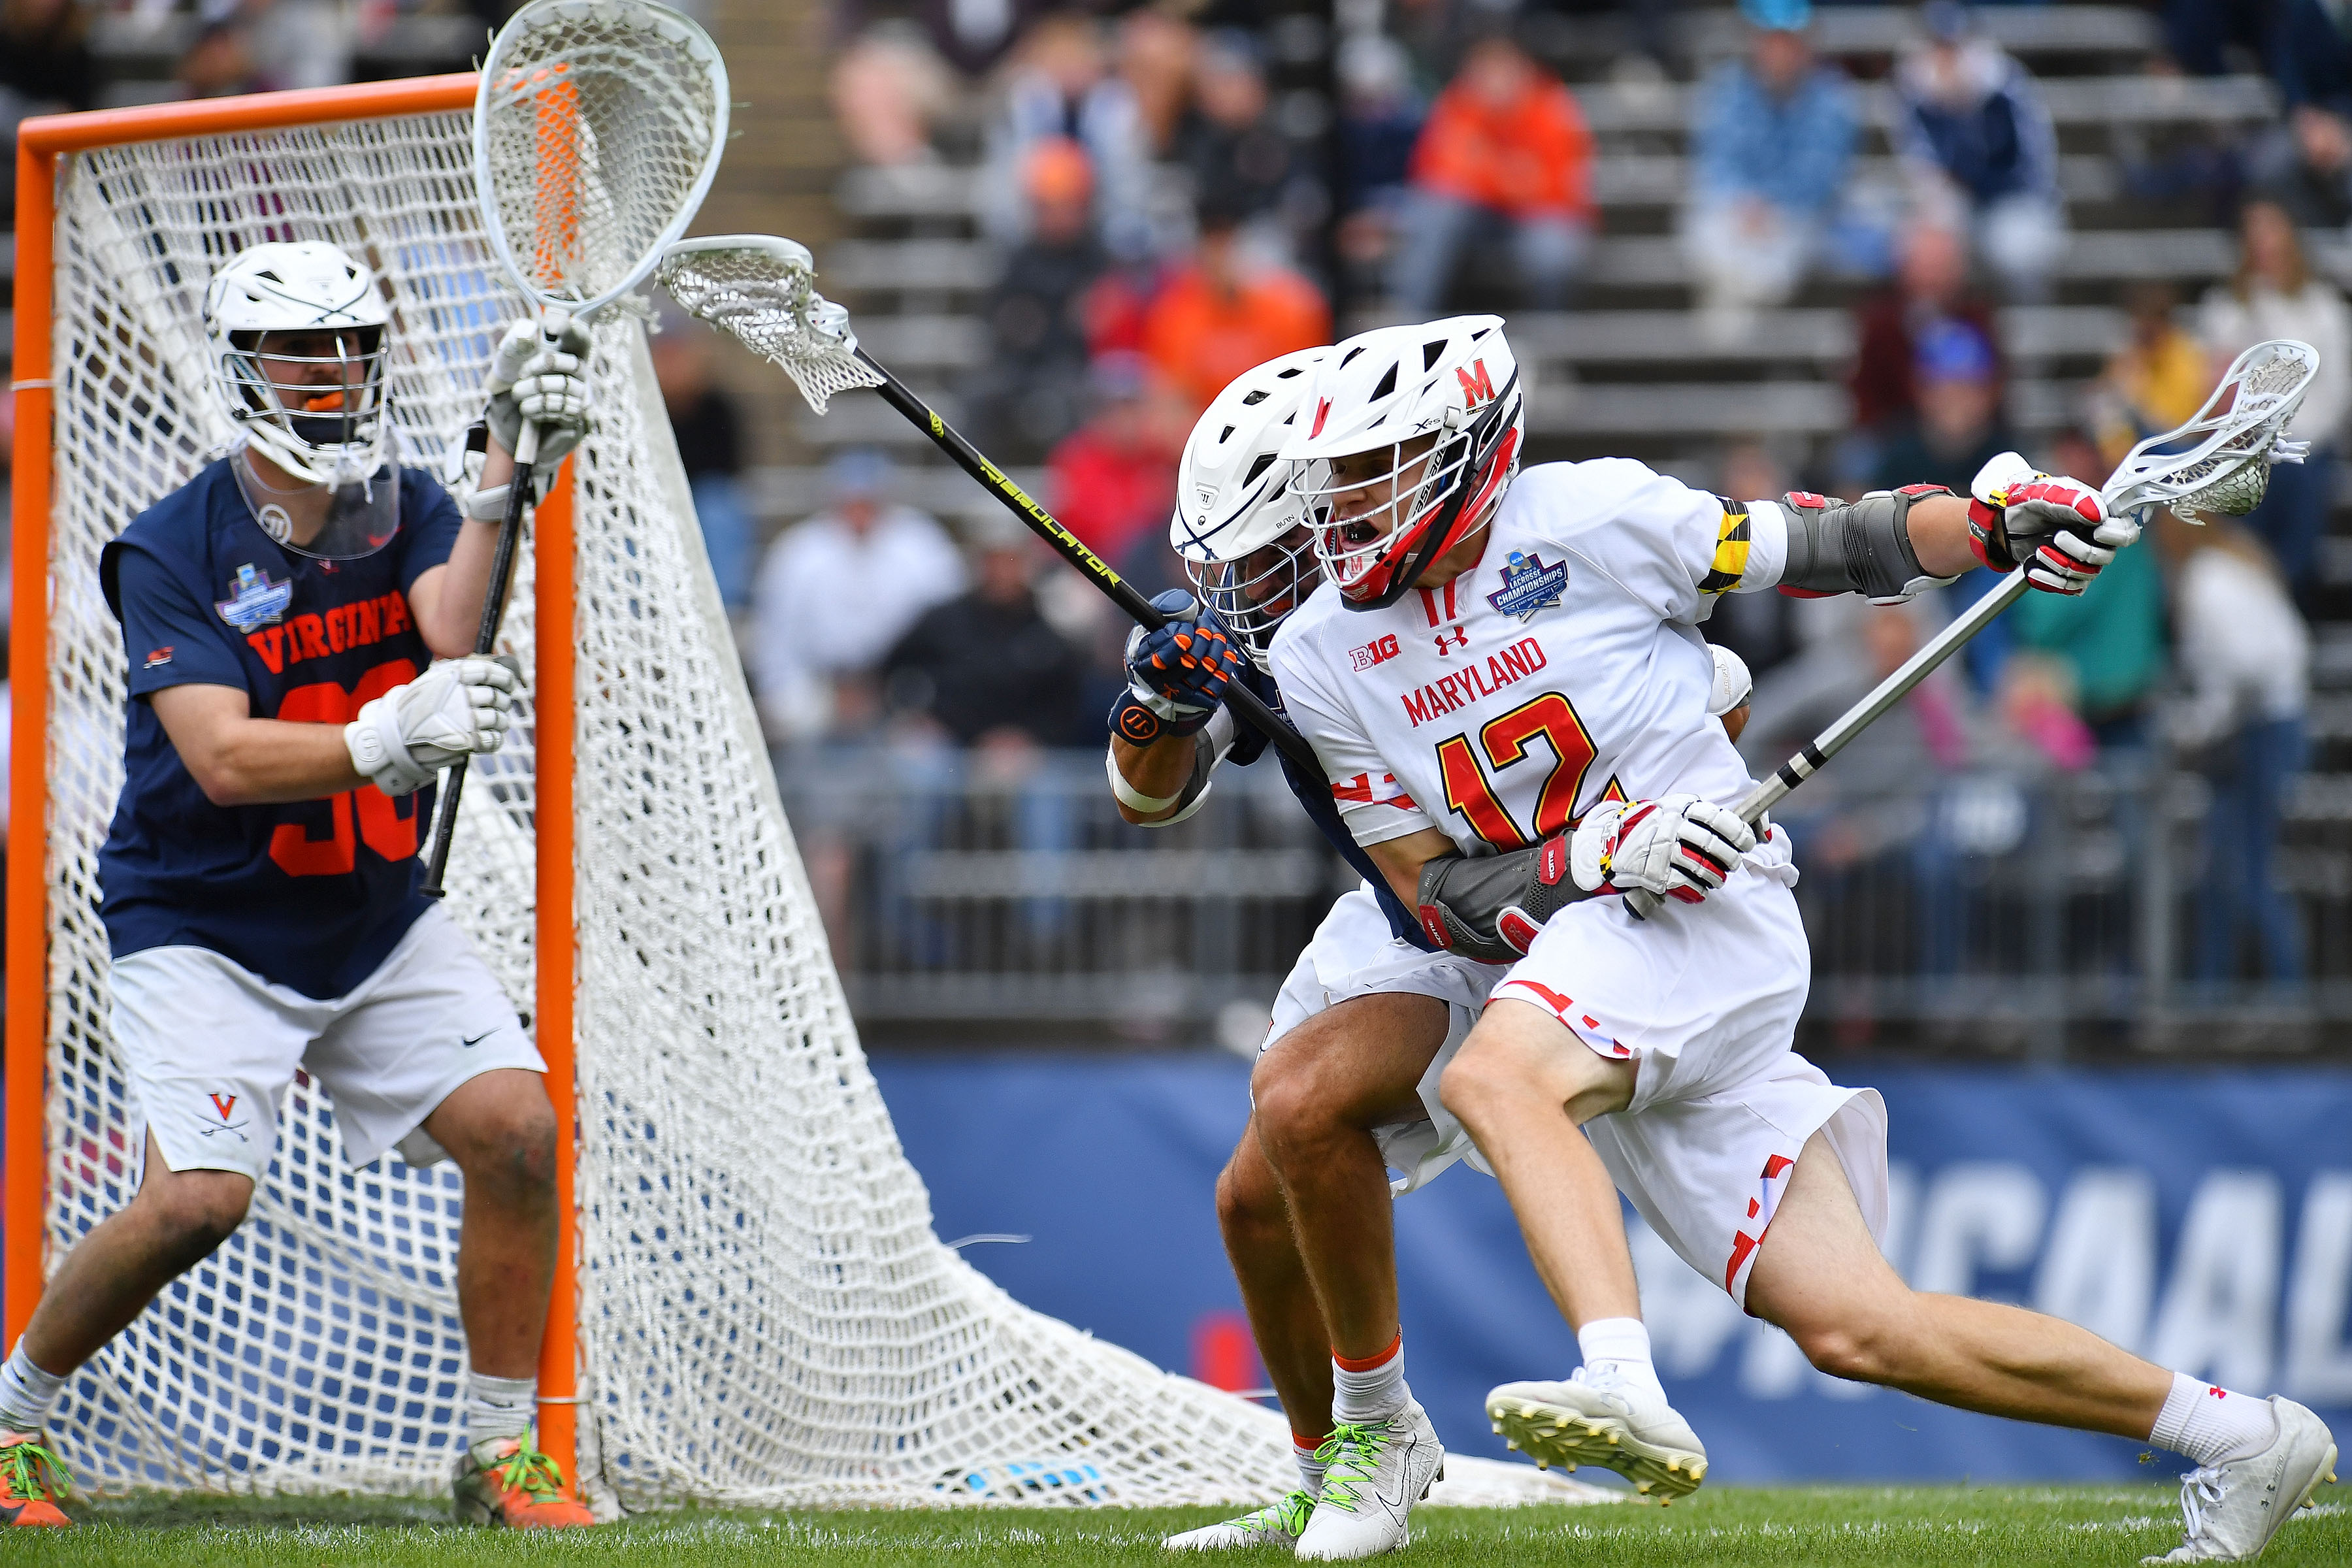 NCAA Lacrosse Championship 2021: Virginia Holds off Maryland's Late